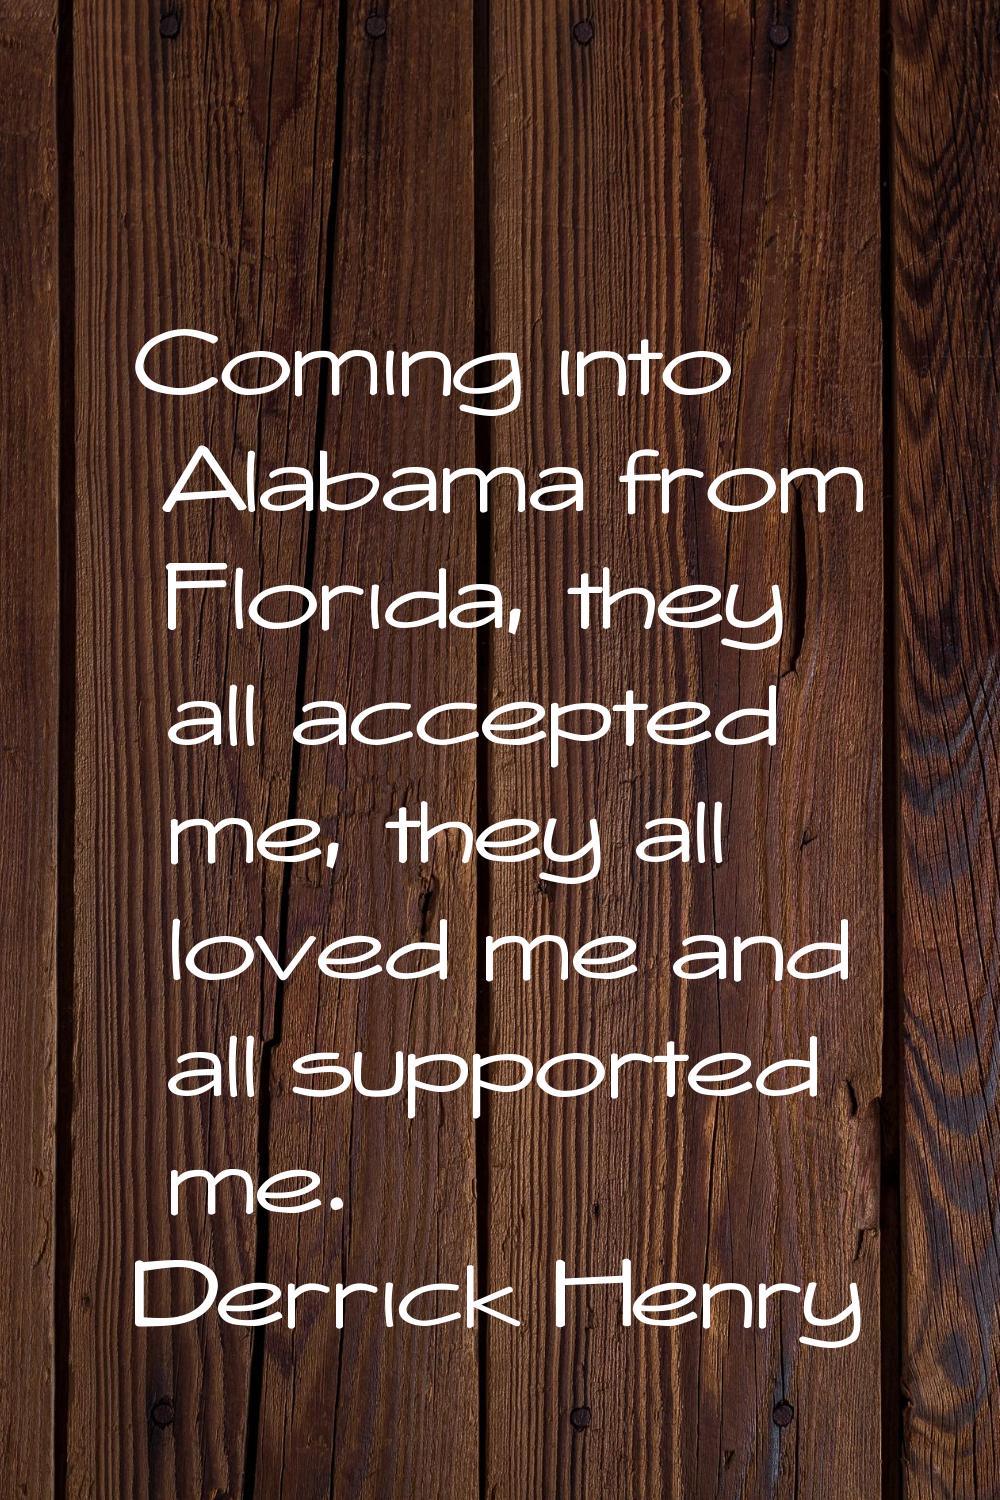 Coming into Alabama from Florida, they all accepted me, they all loved me and all supported me.